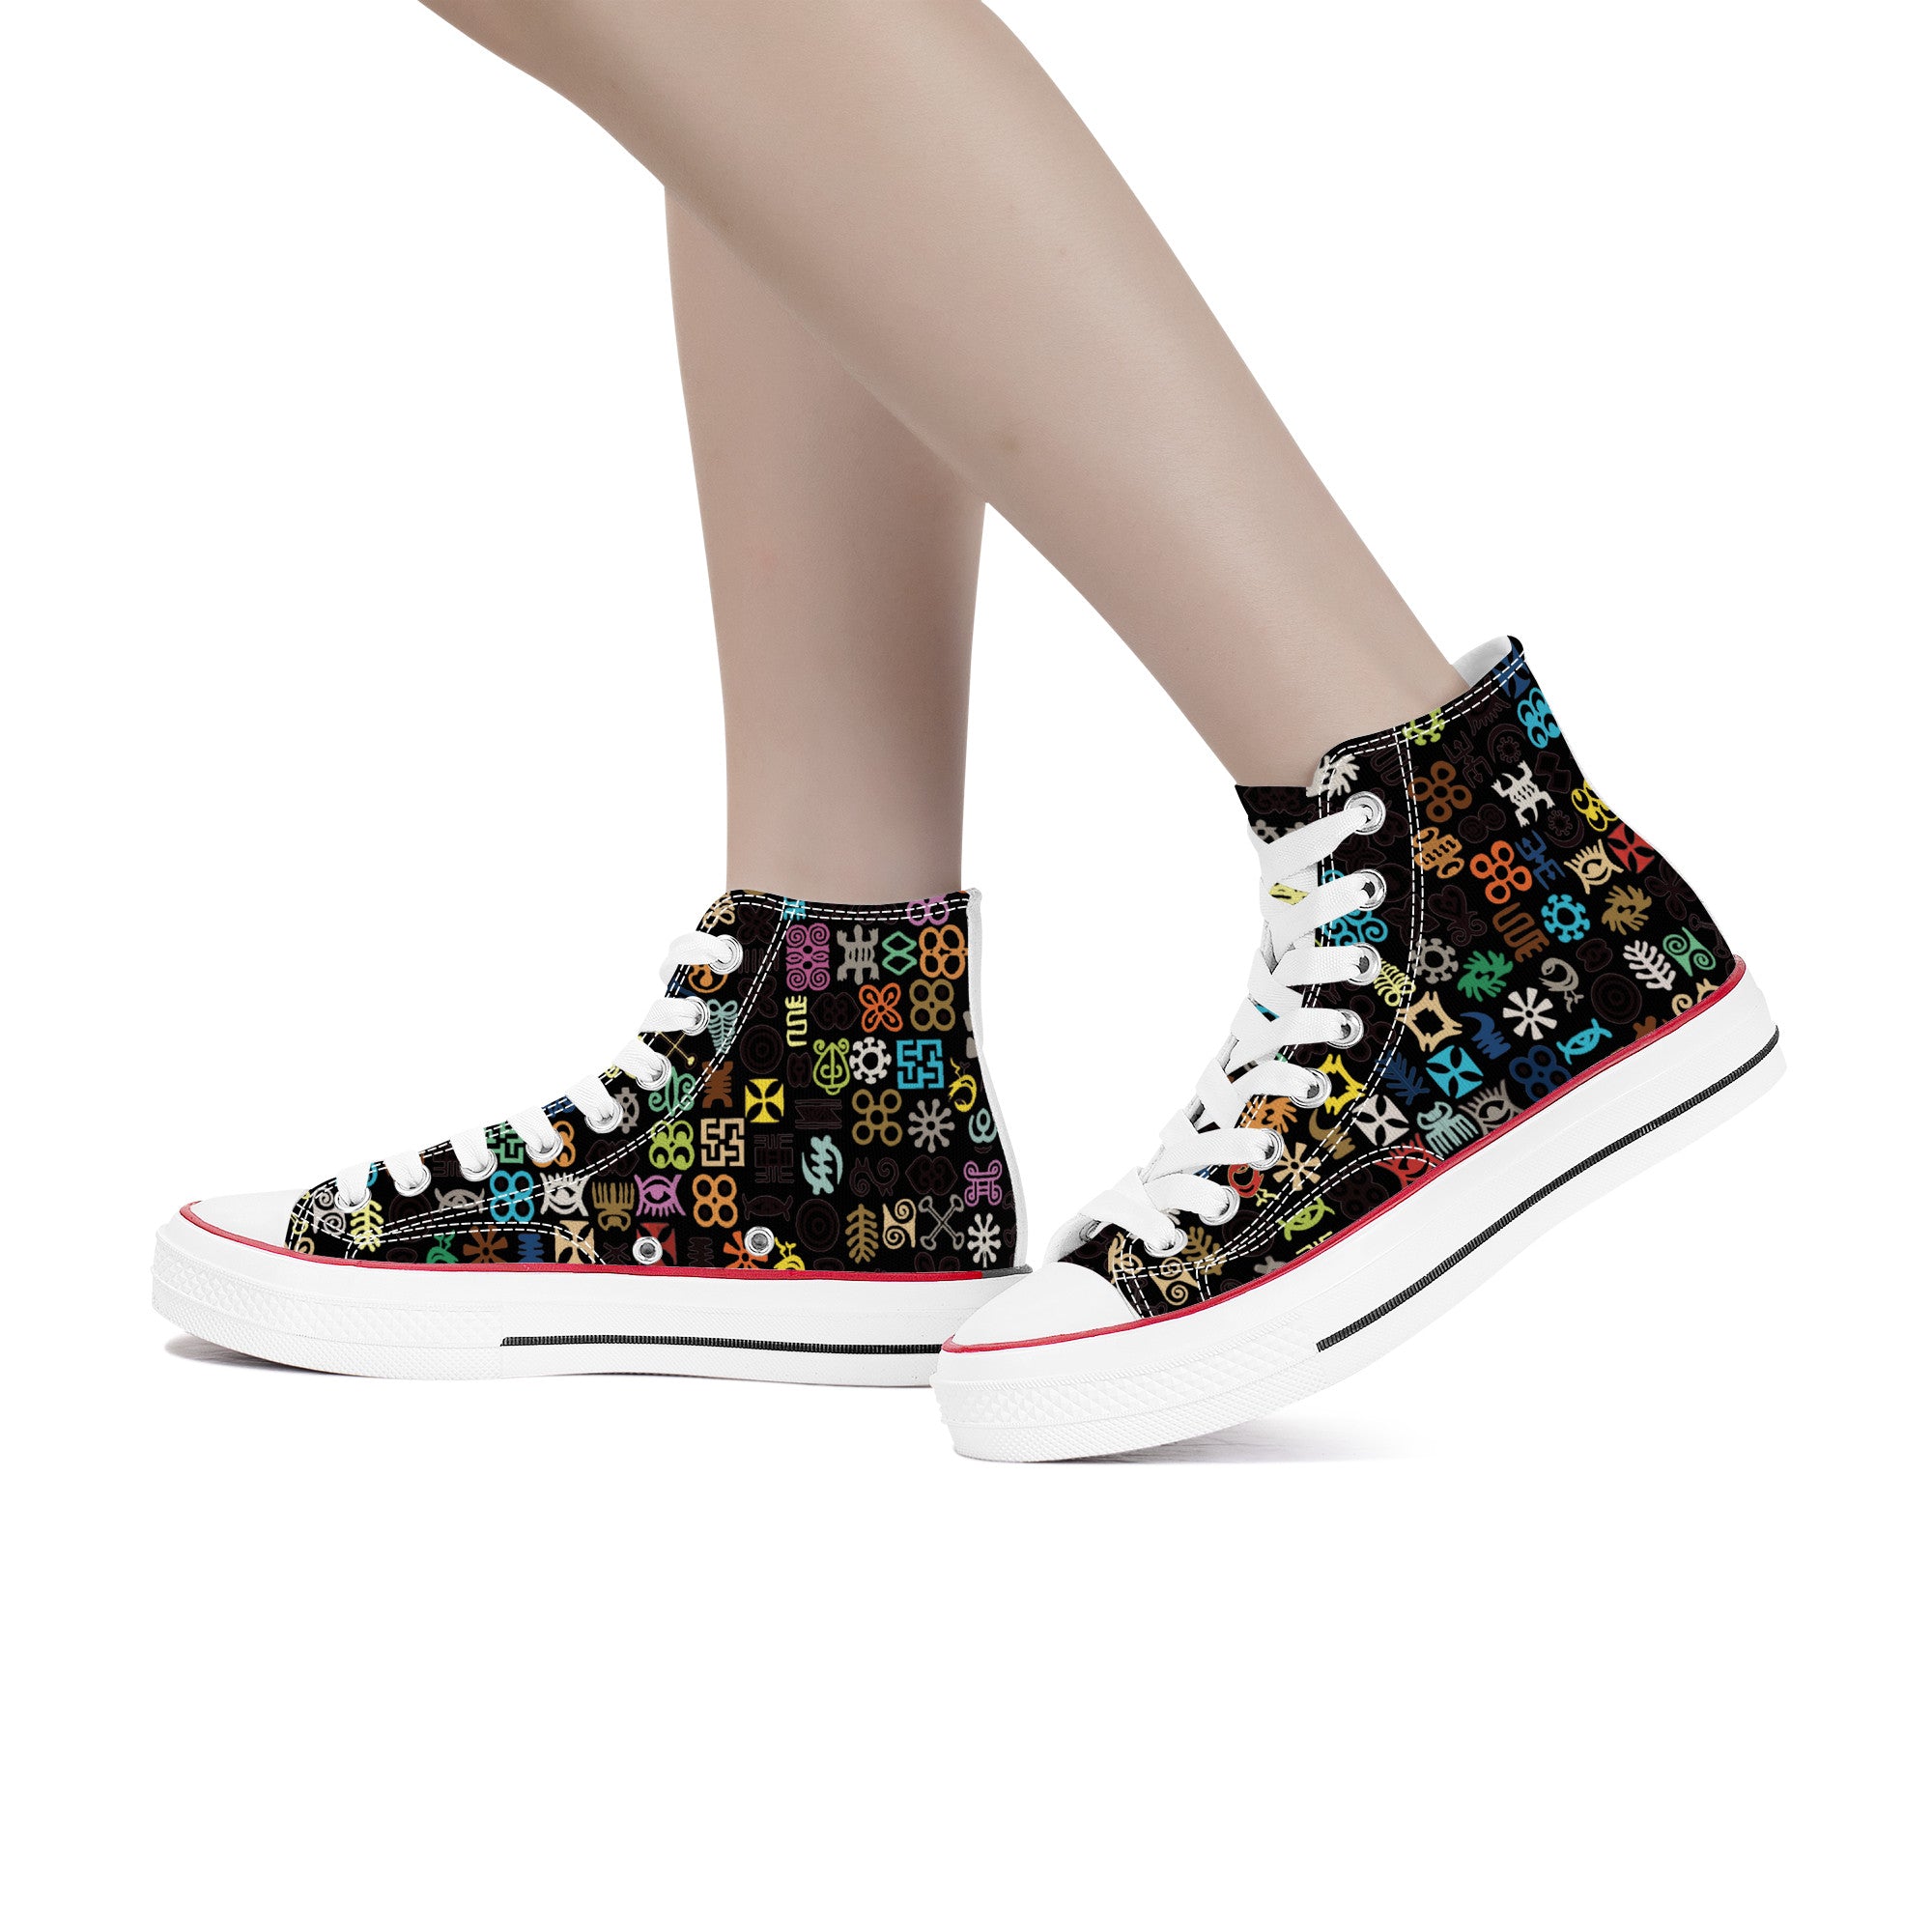 ADINKRA HIGH TOP CANVAS SHOES - BLACK SNEAKERS WITH MULTICOLOR PRINT